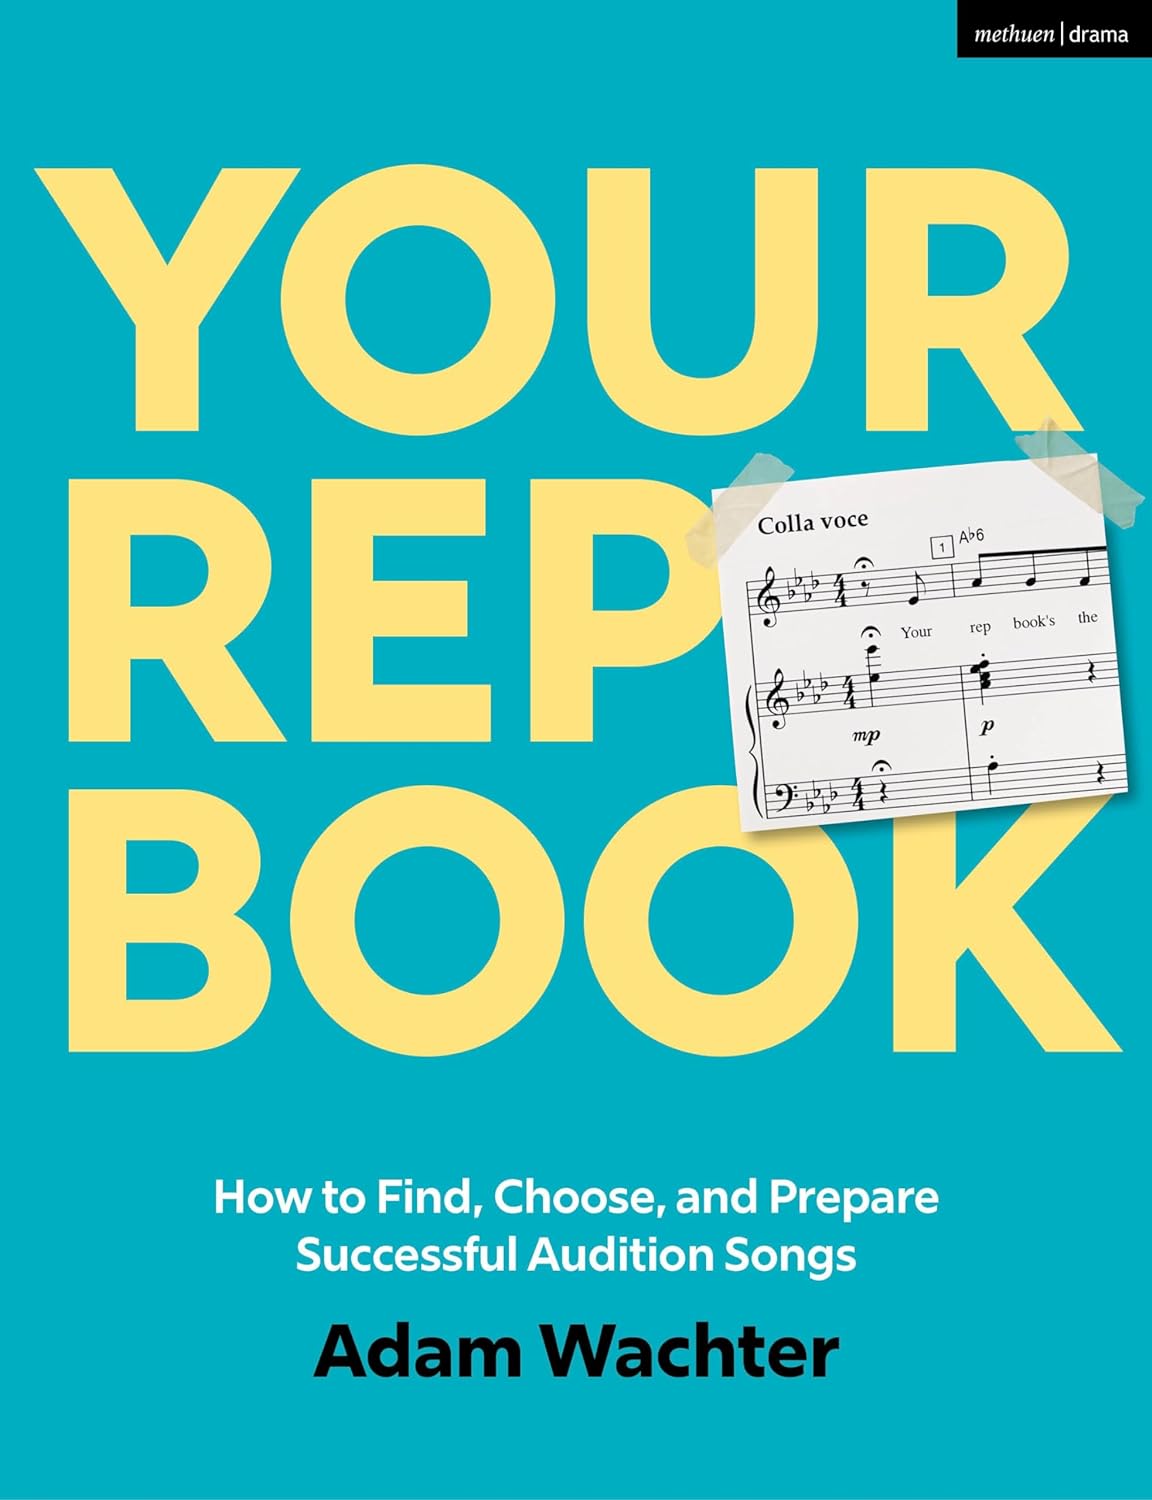 How to Find, Choose, and Prepare Successful Audition Cover